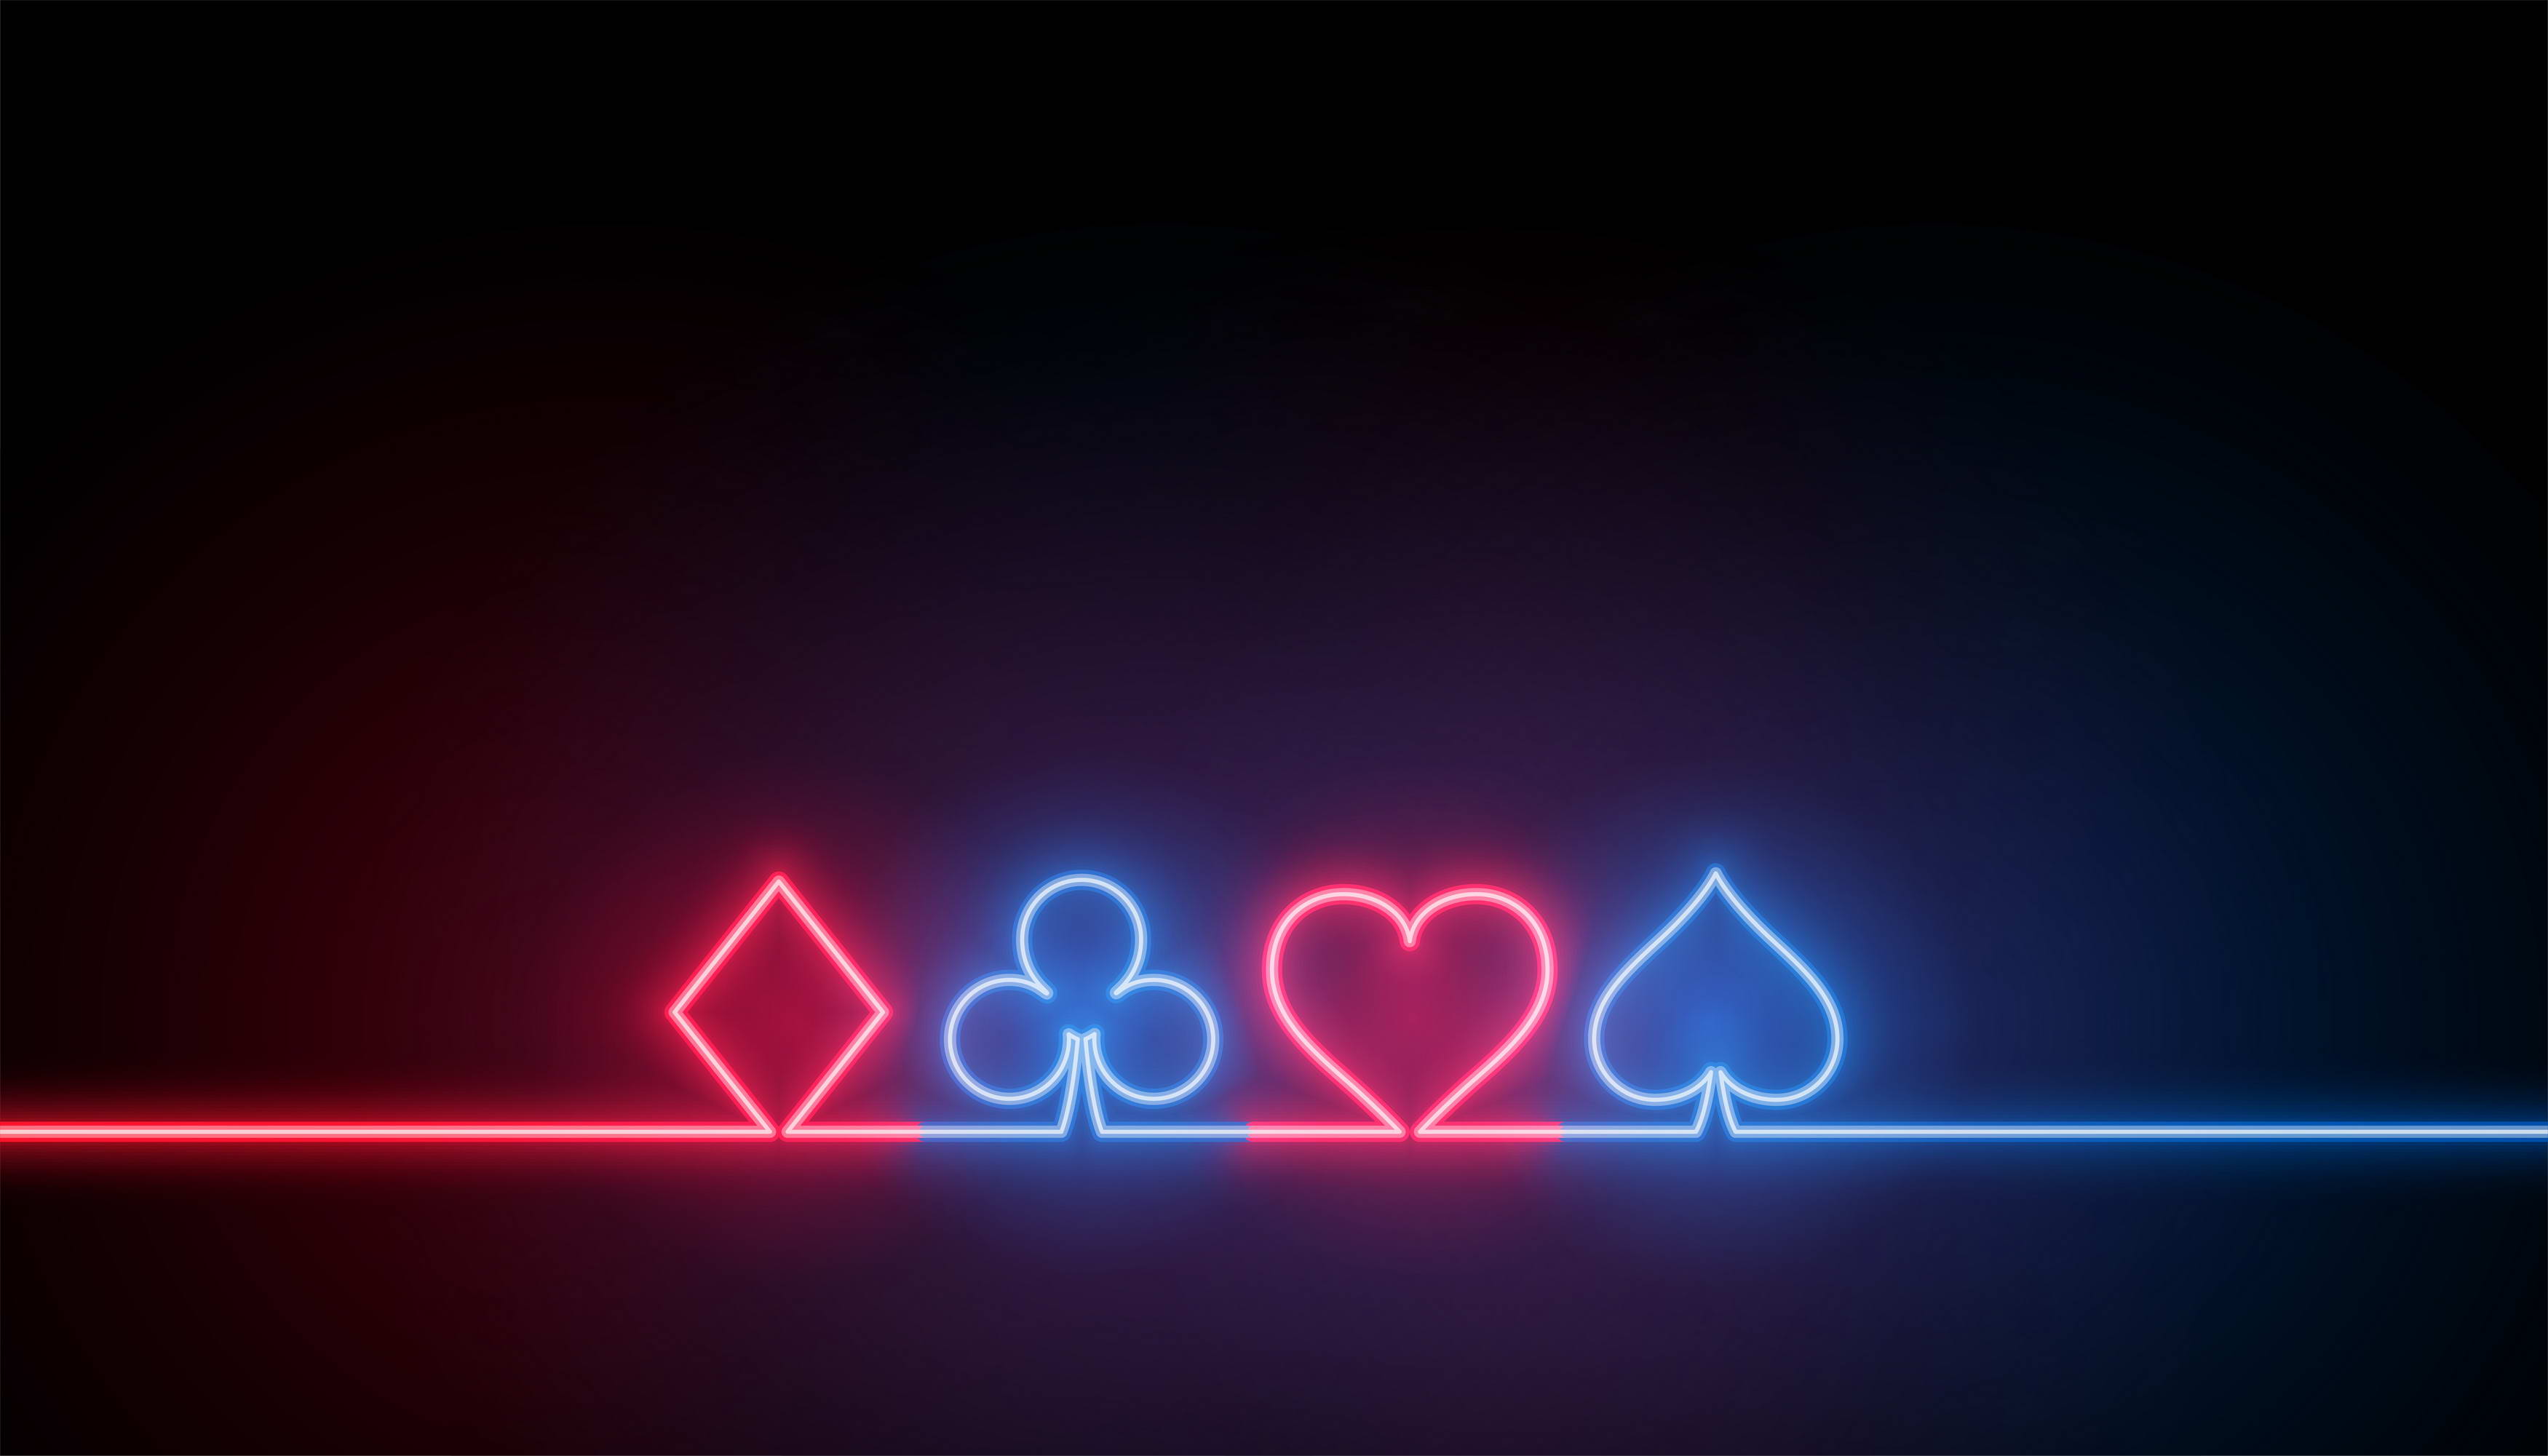 neon symbols of casino playing cards background